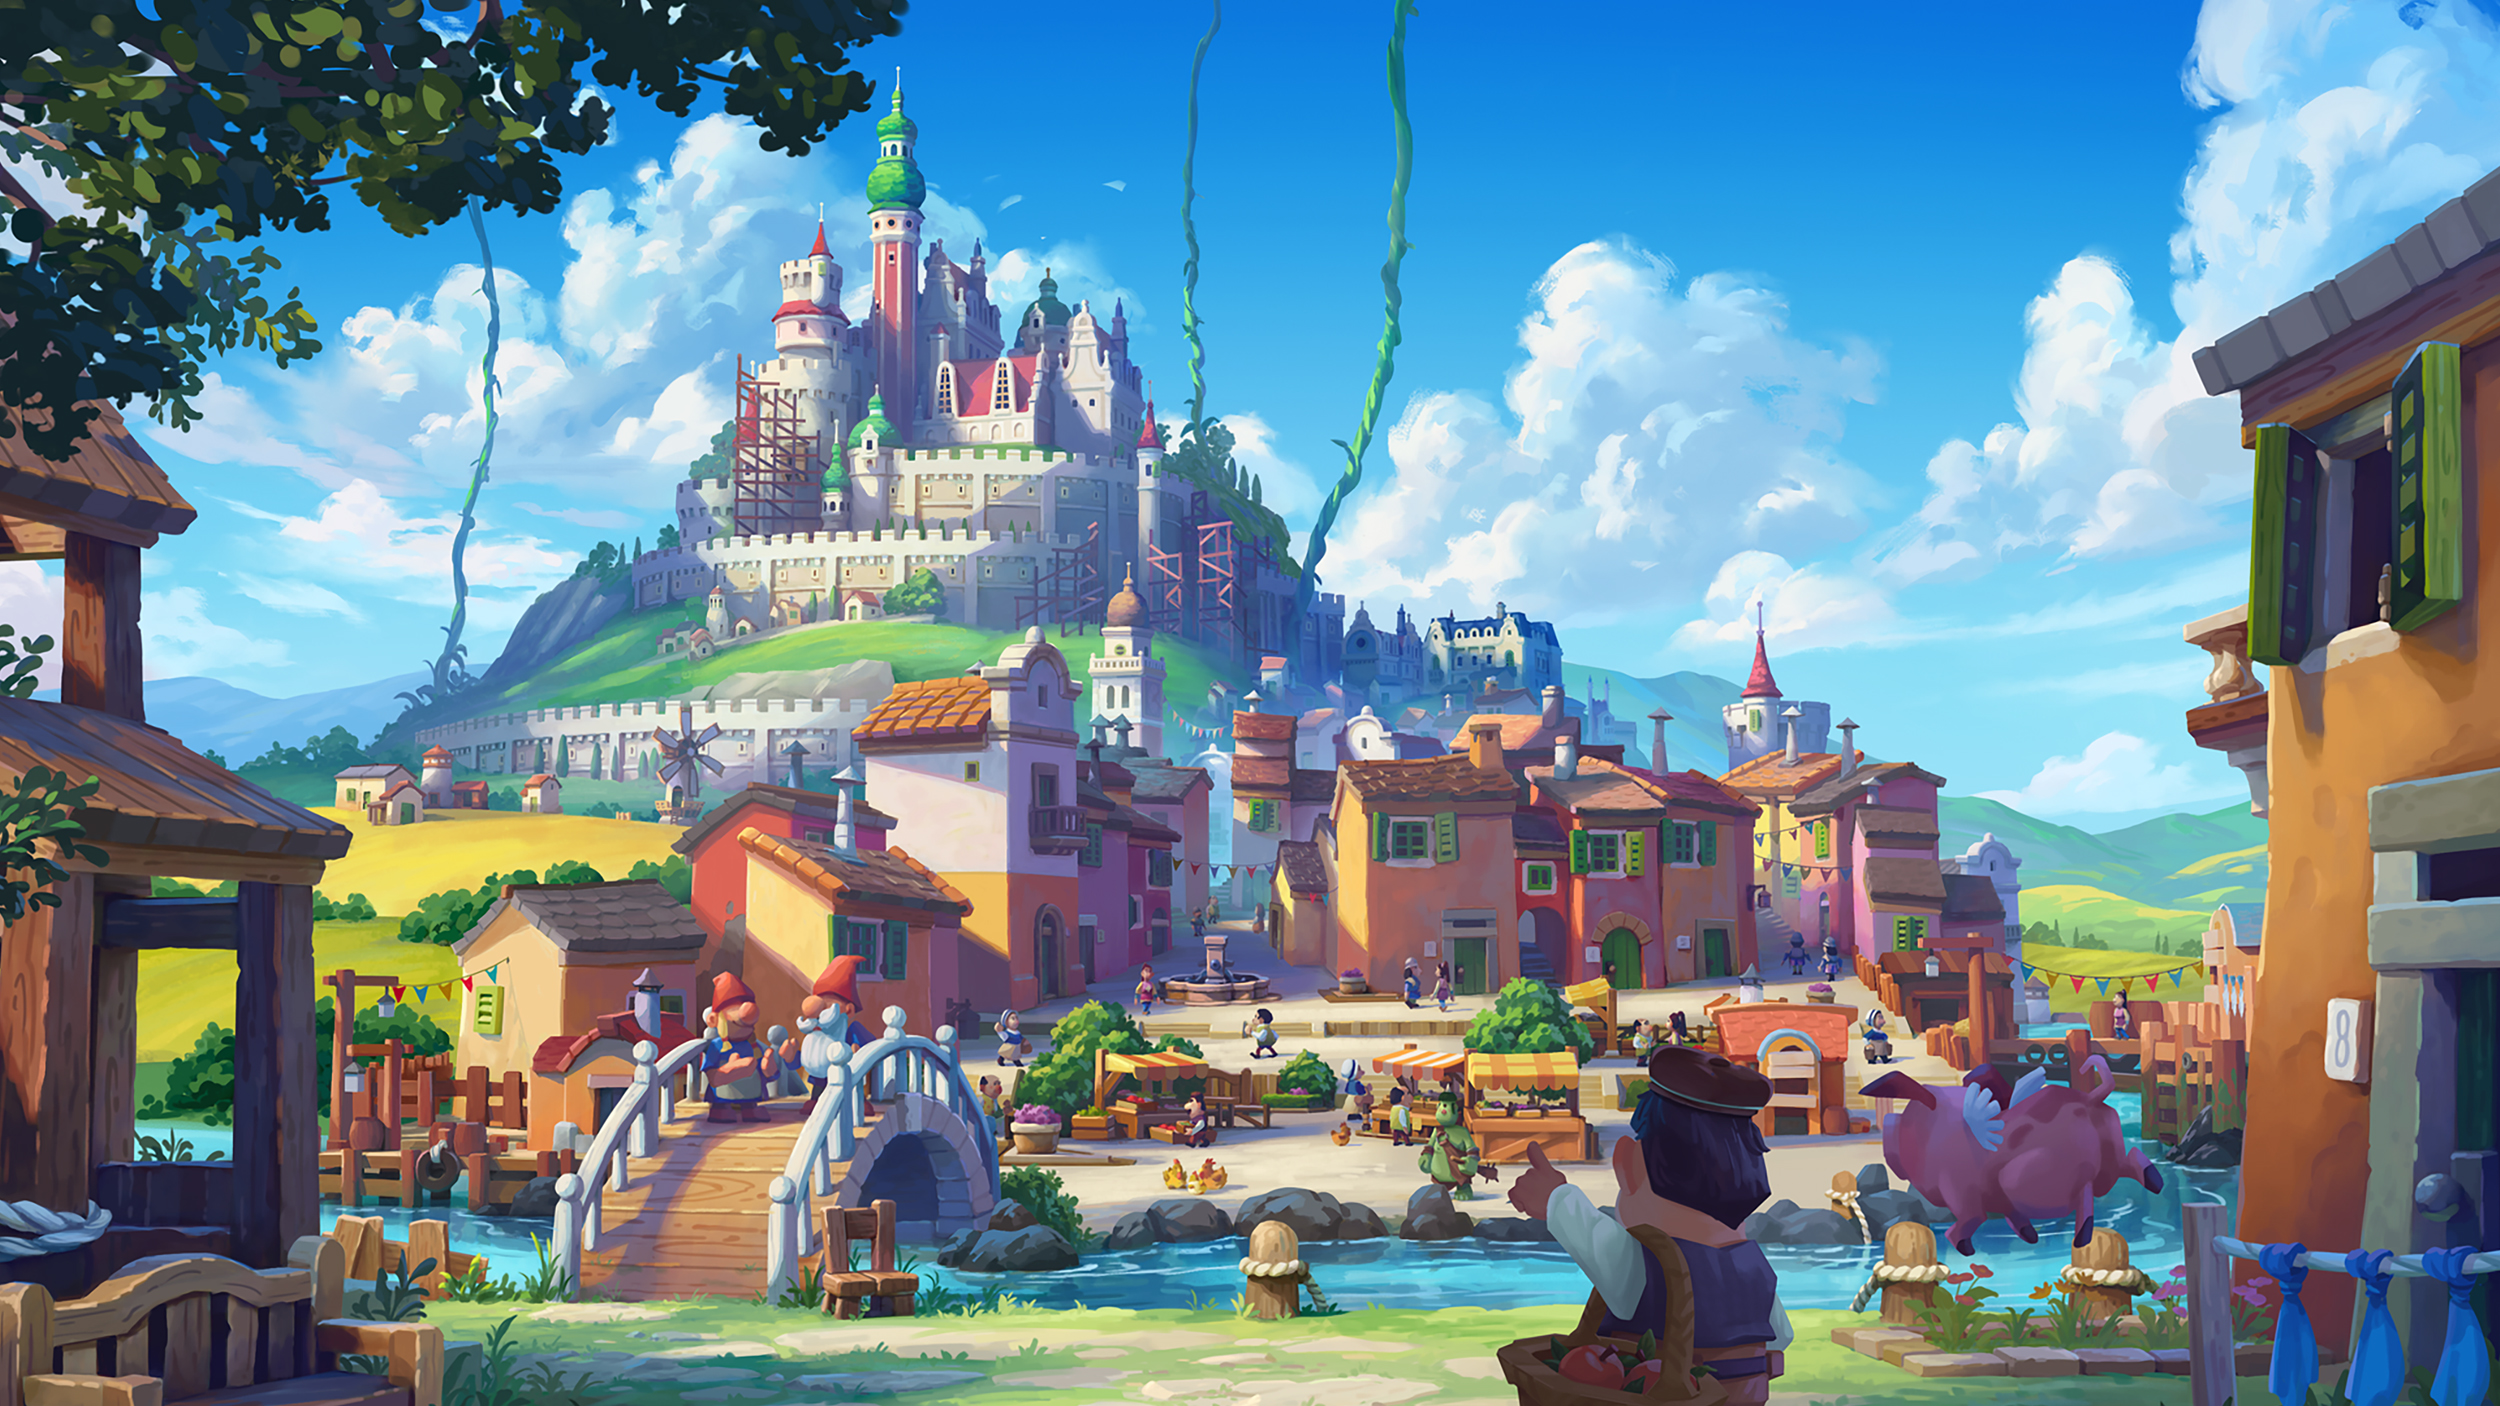 Don’t sleep on this gorgeous fantasy city builder launching next month